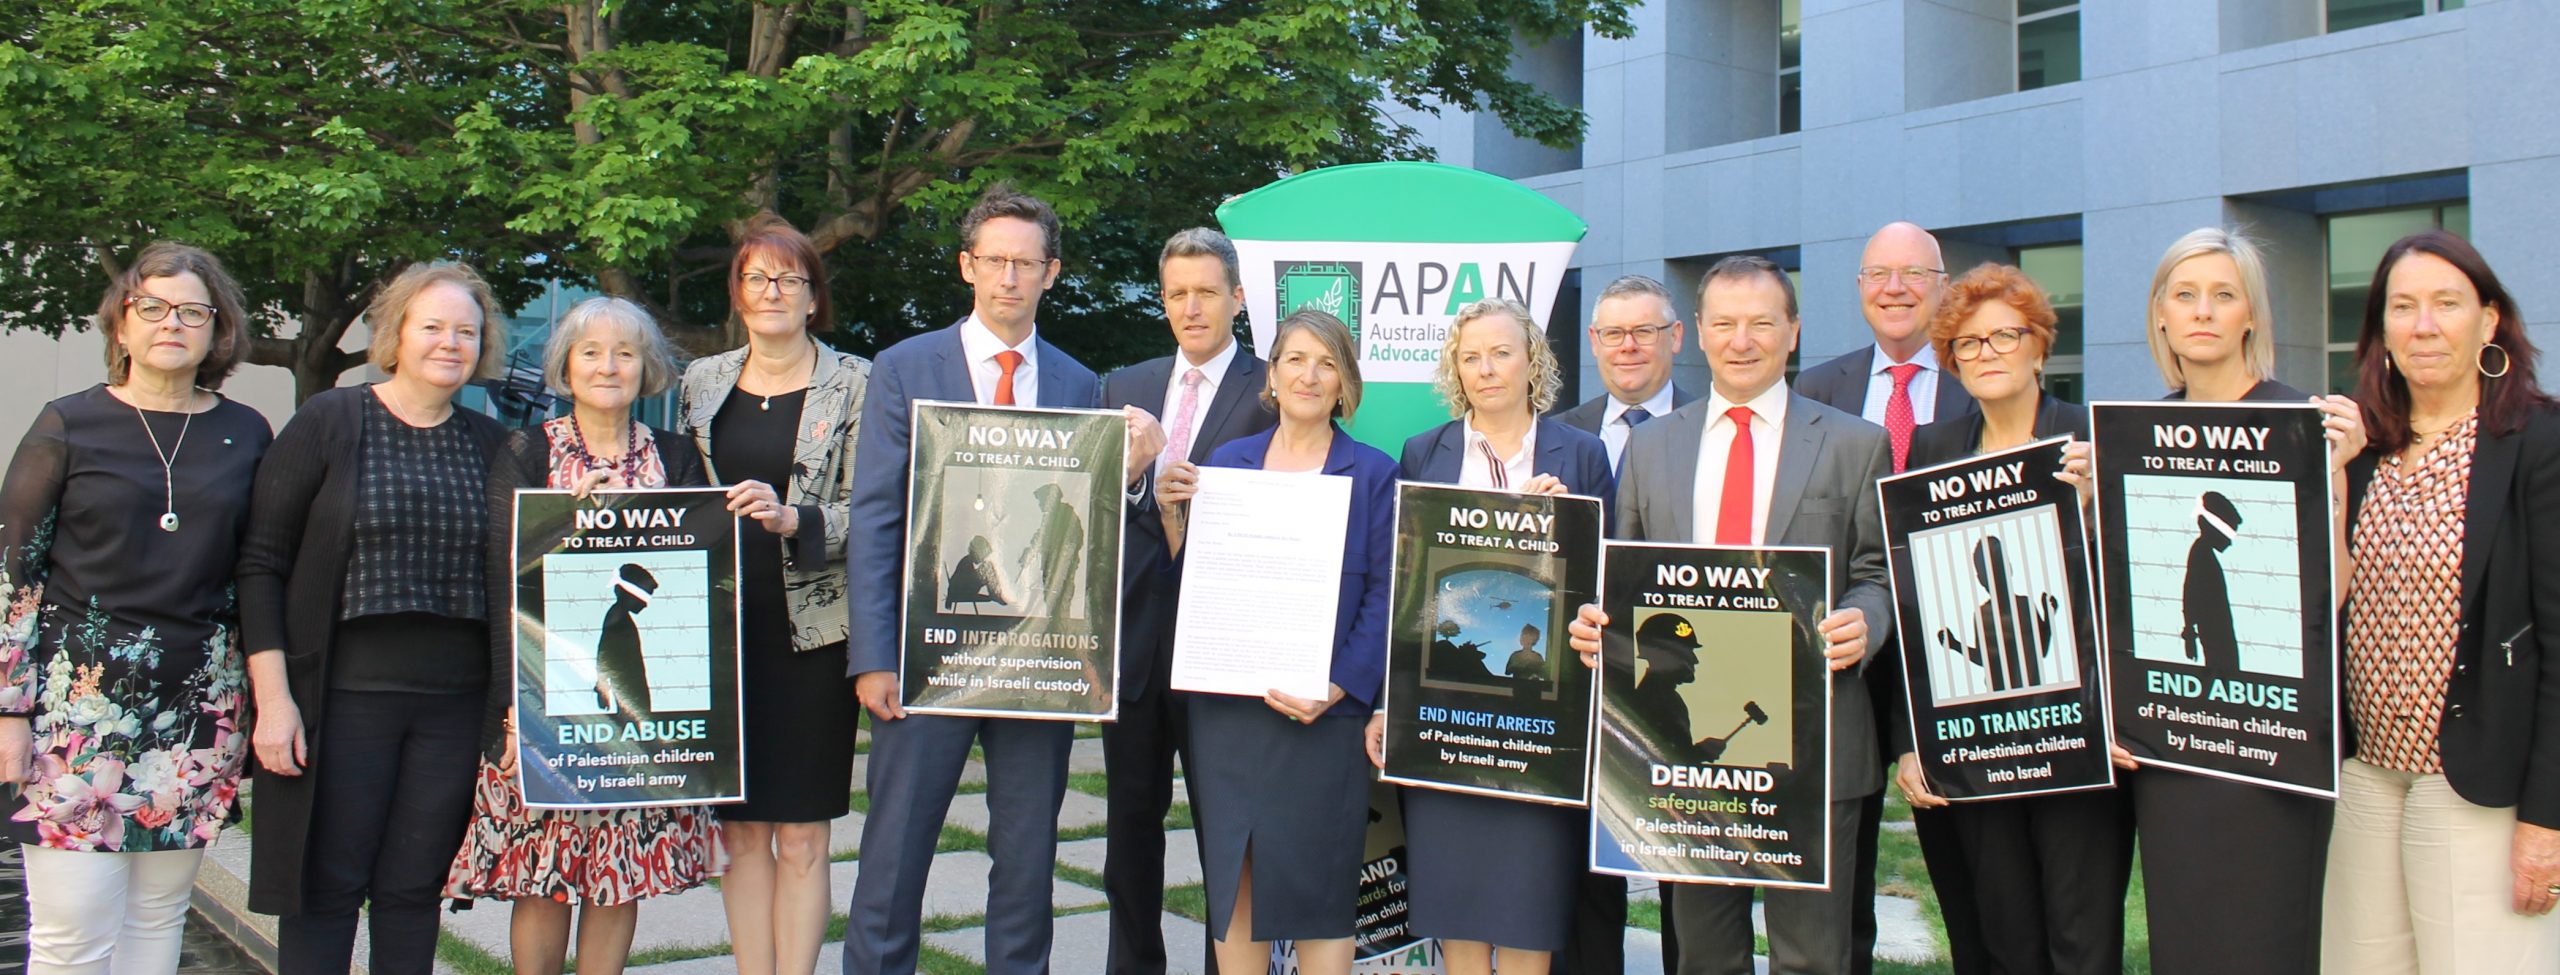 Photo of 15 ALP parliamentarians holding signs "no way to treat a child